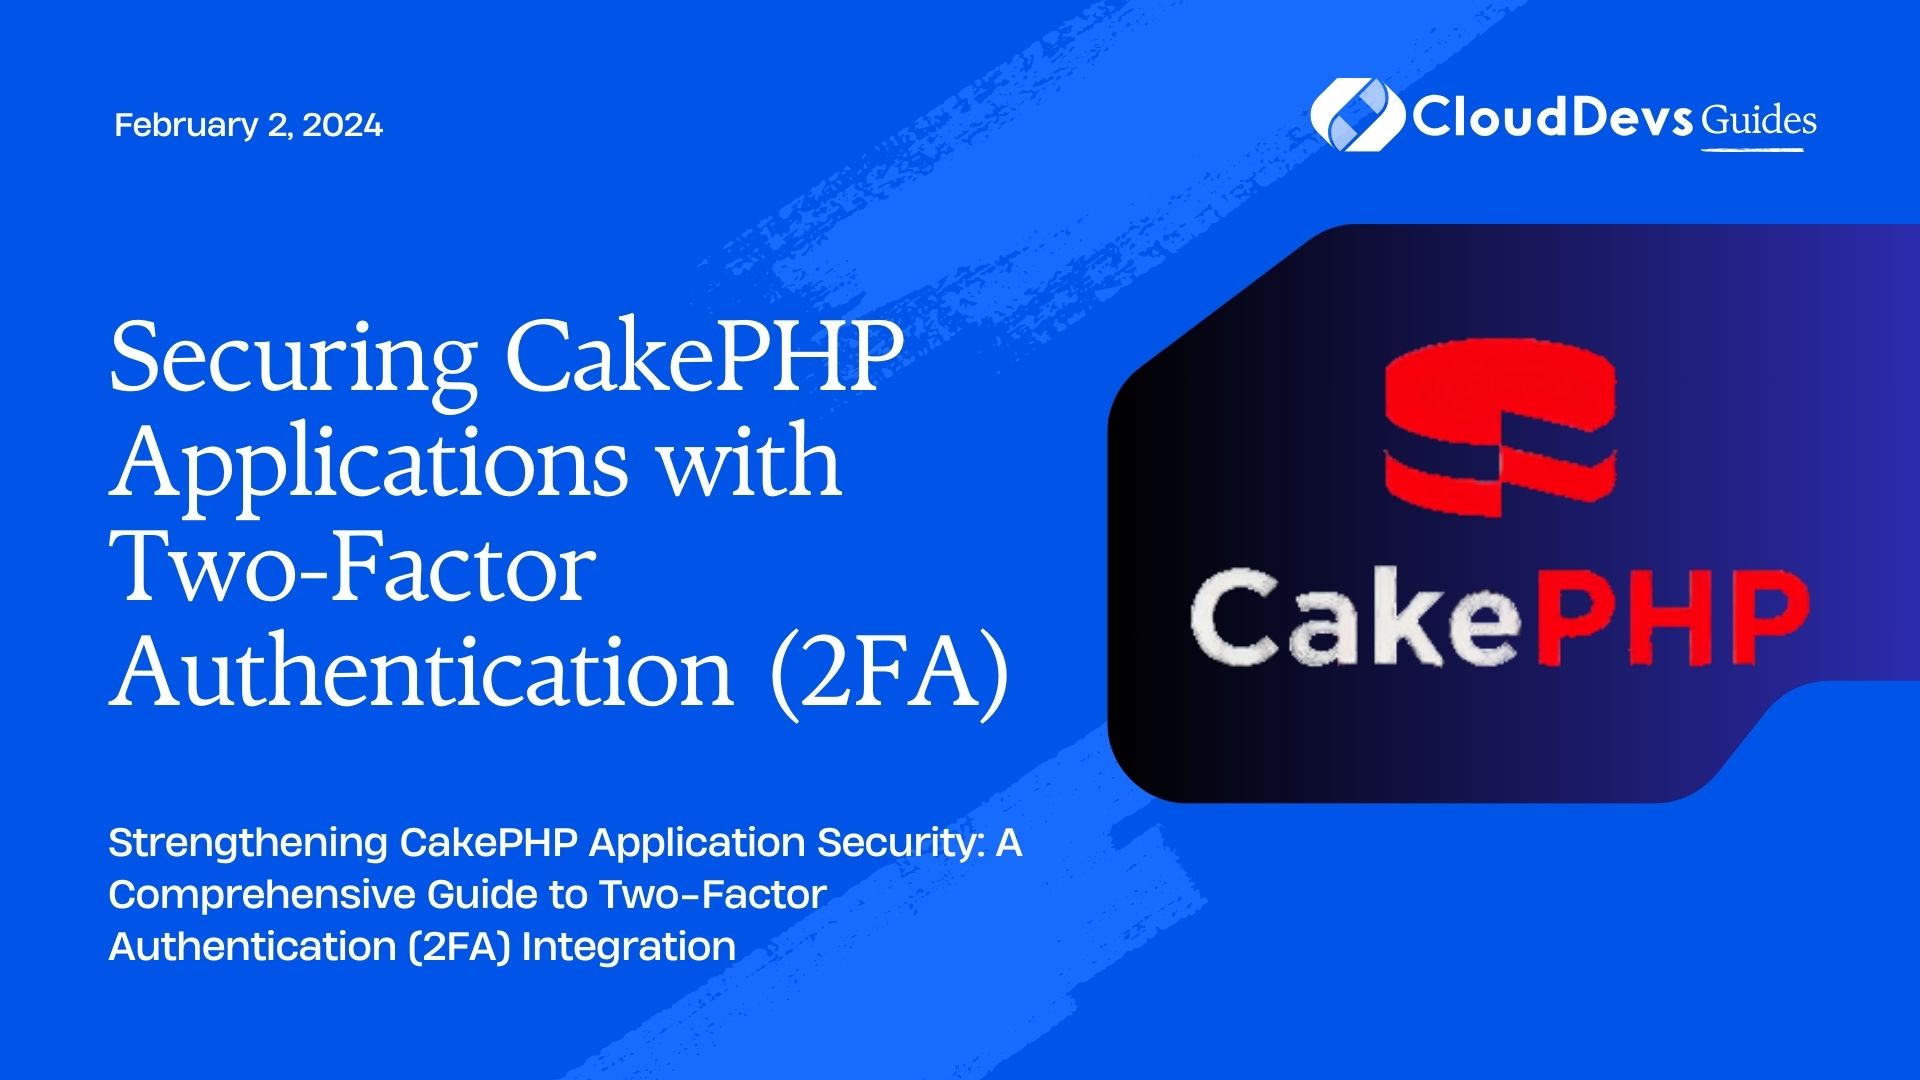 Securing CakePHP Applications with Two-Factor Authentication (2FA)